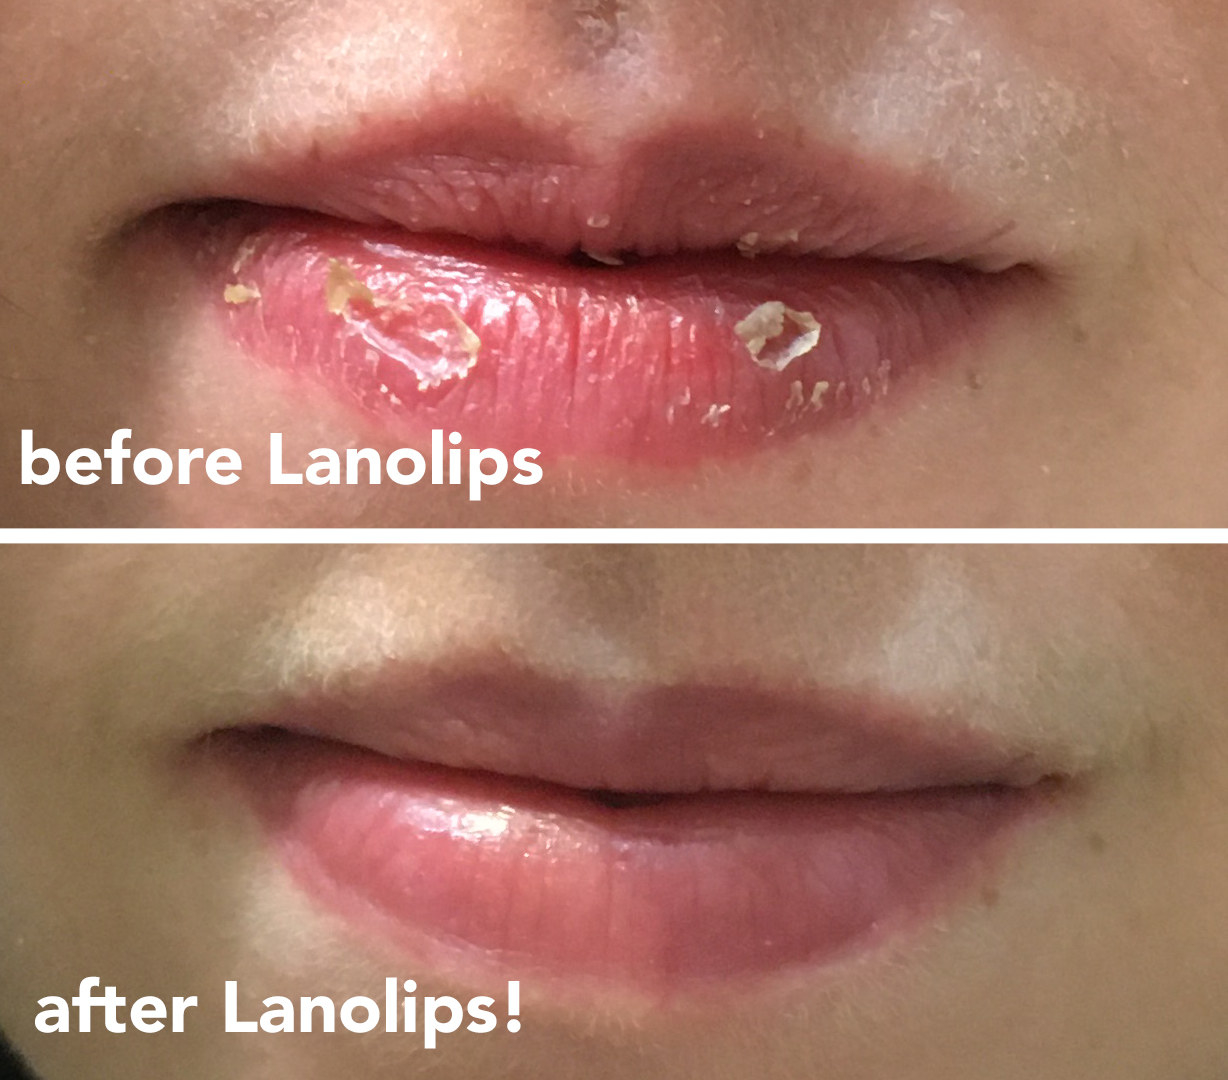 on top, a buzzfeed editor&#x27;s dry cracked lips, on the bottom the same lips looking healed and smooth